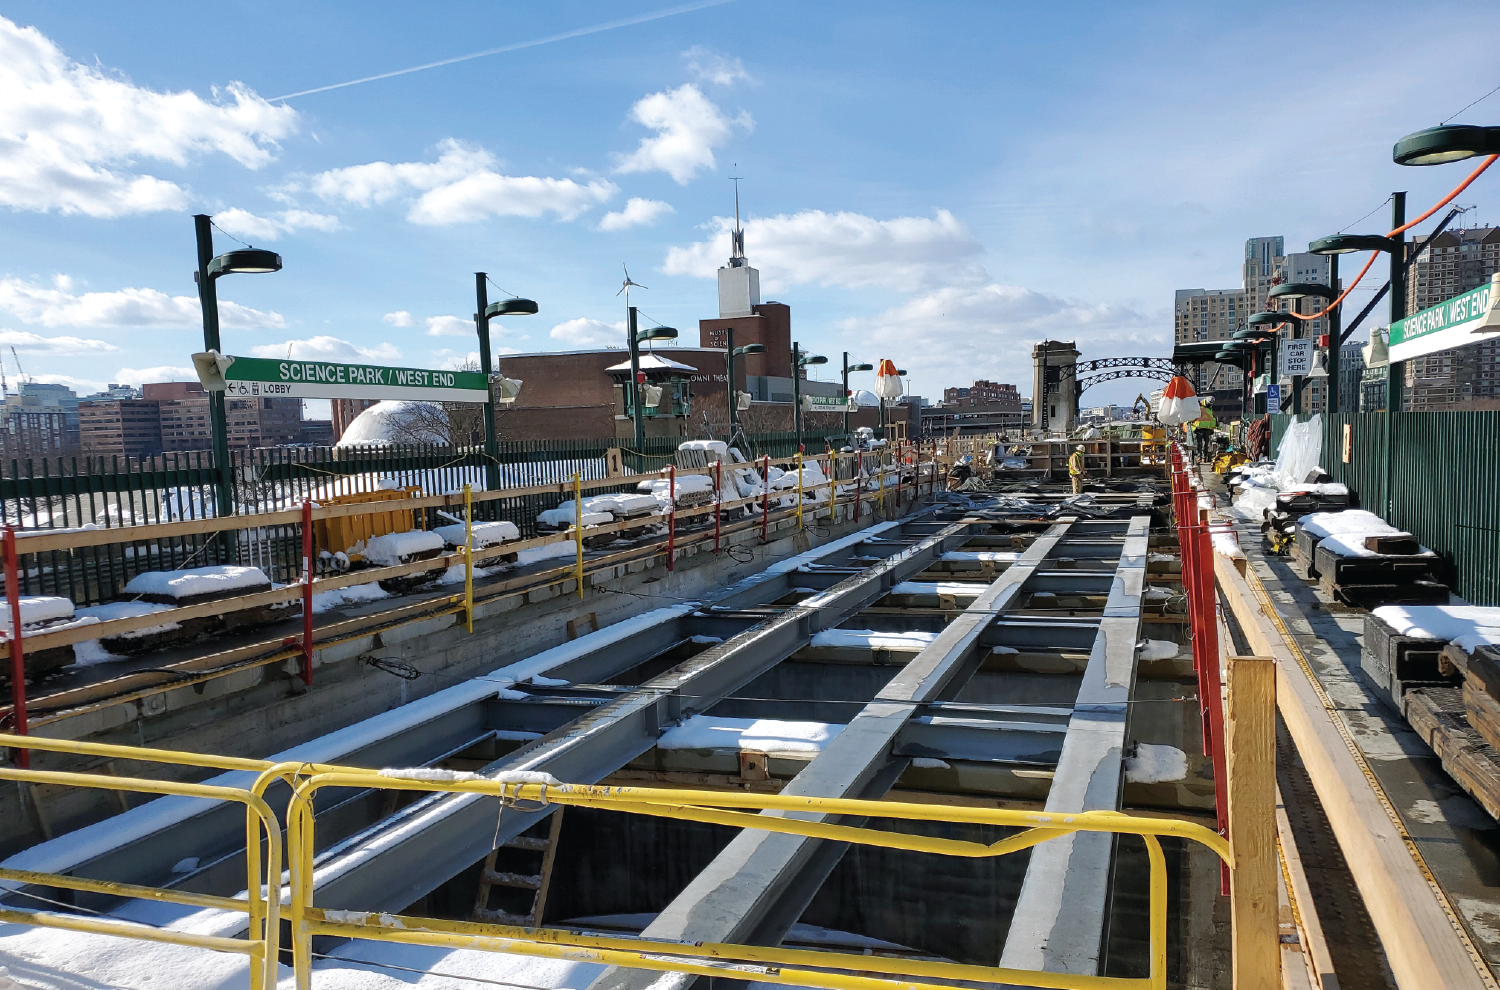 Steel beams to support the new tracks have been installed on the Lechmere Viaduct